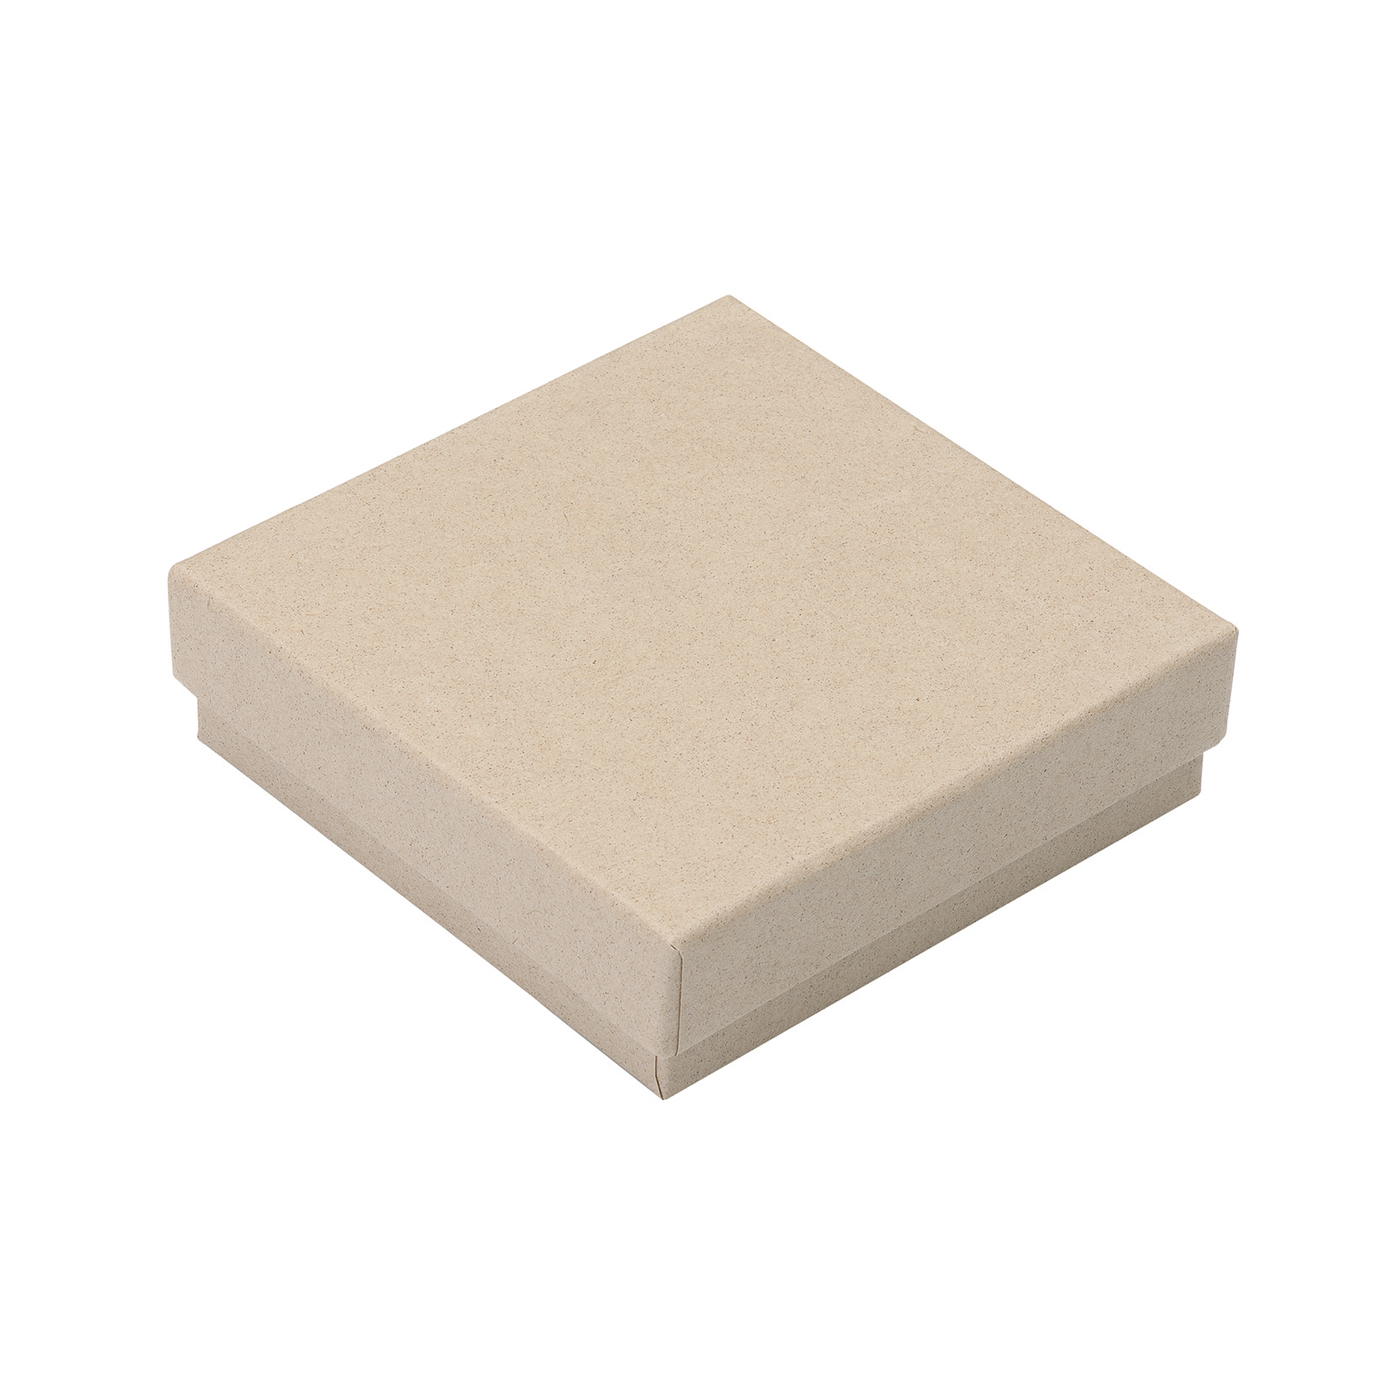 Jewellery Packaging "Eco", Natural, 86 x 86 x 26 mm - 1 piece